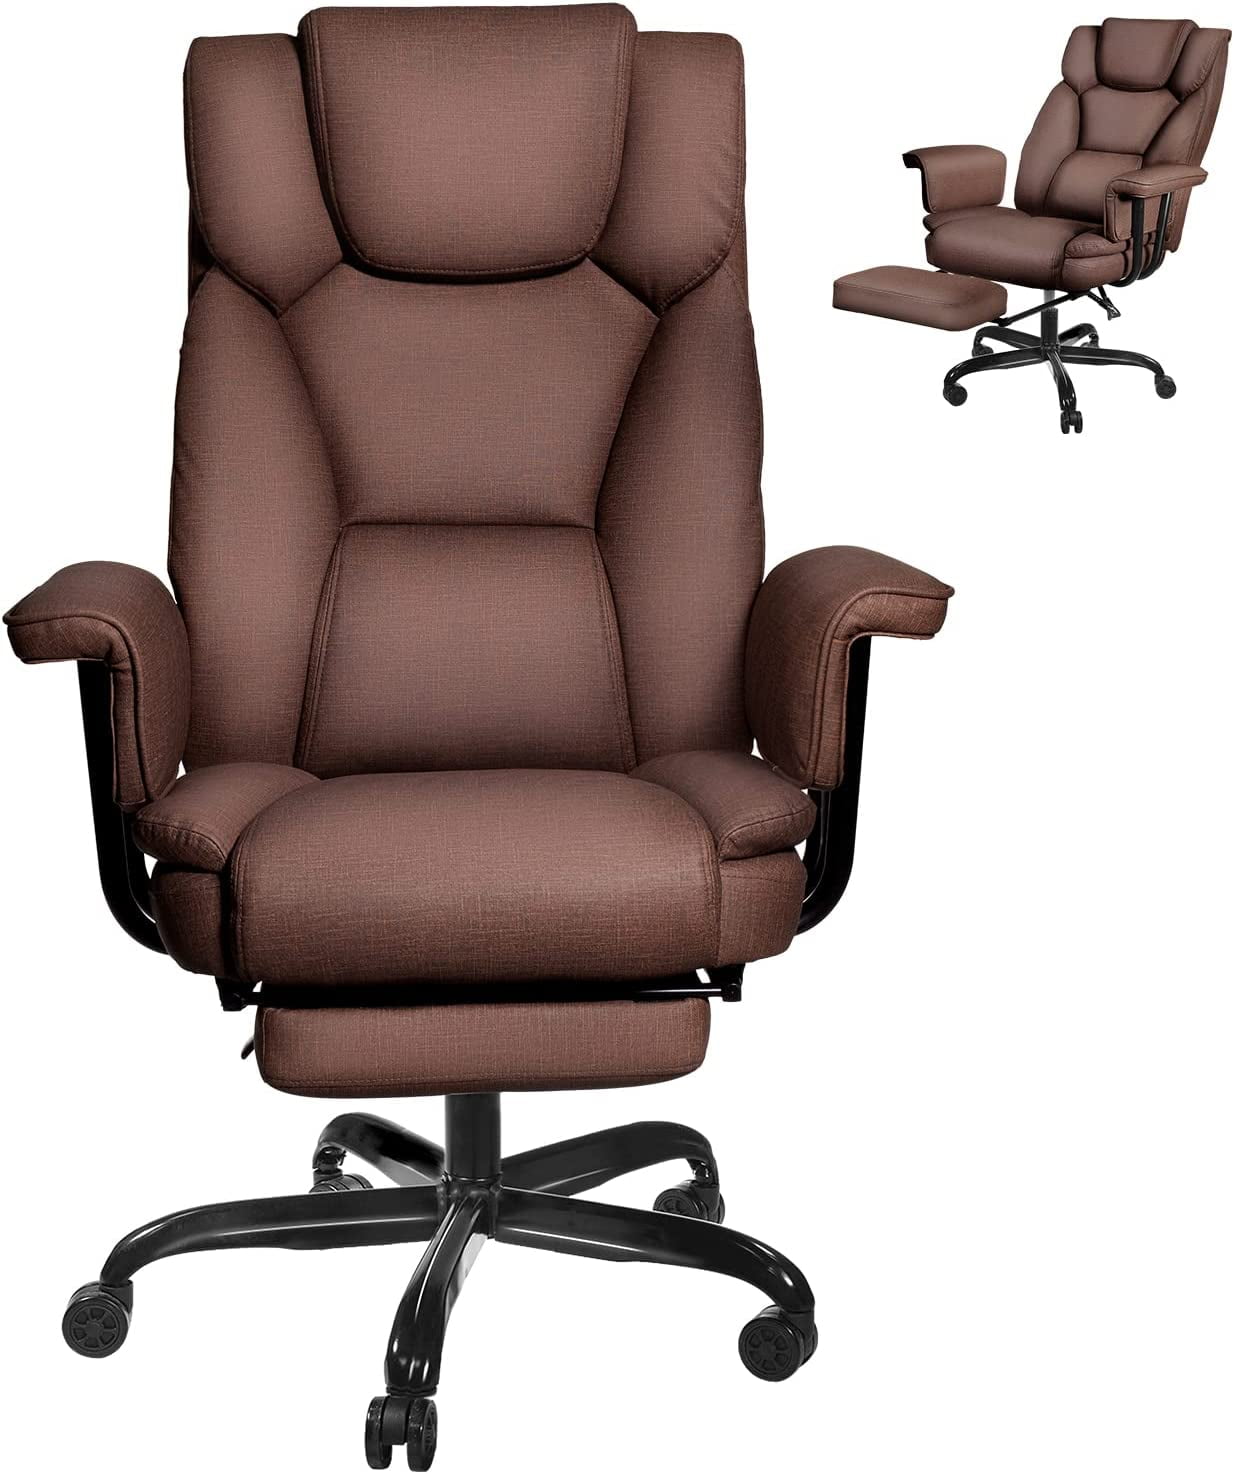 HOMREST Reclining Chair with Massage, Ergonomic Office Breathable Fabric  Executive Computer Chair w/Retractable Footrest, High Back Swivel Recliner